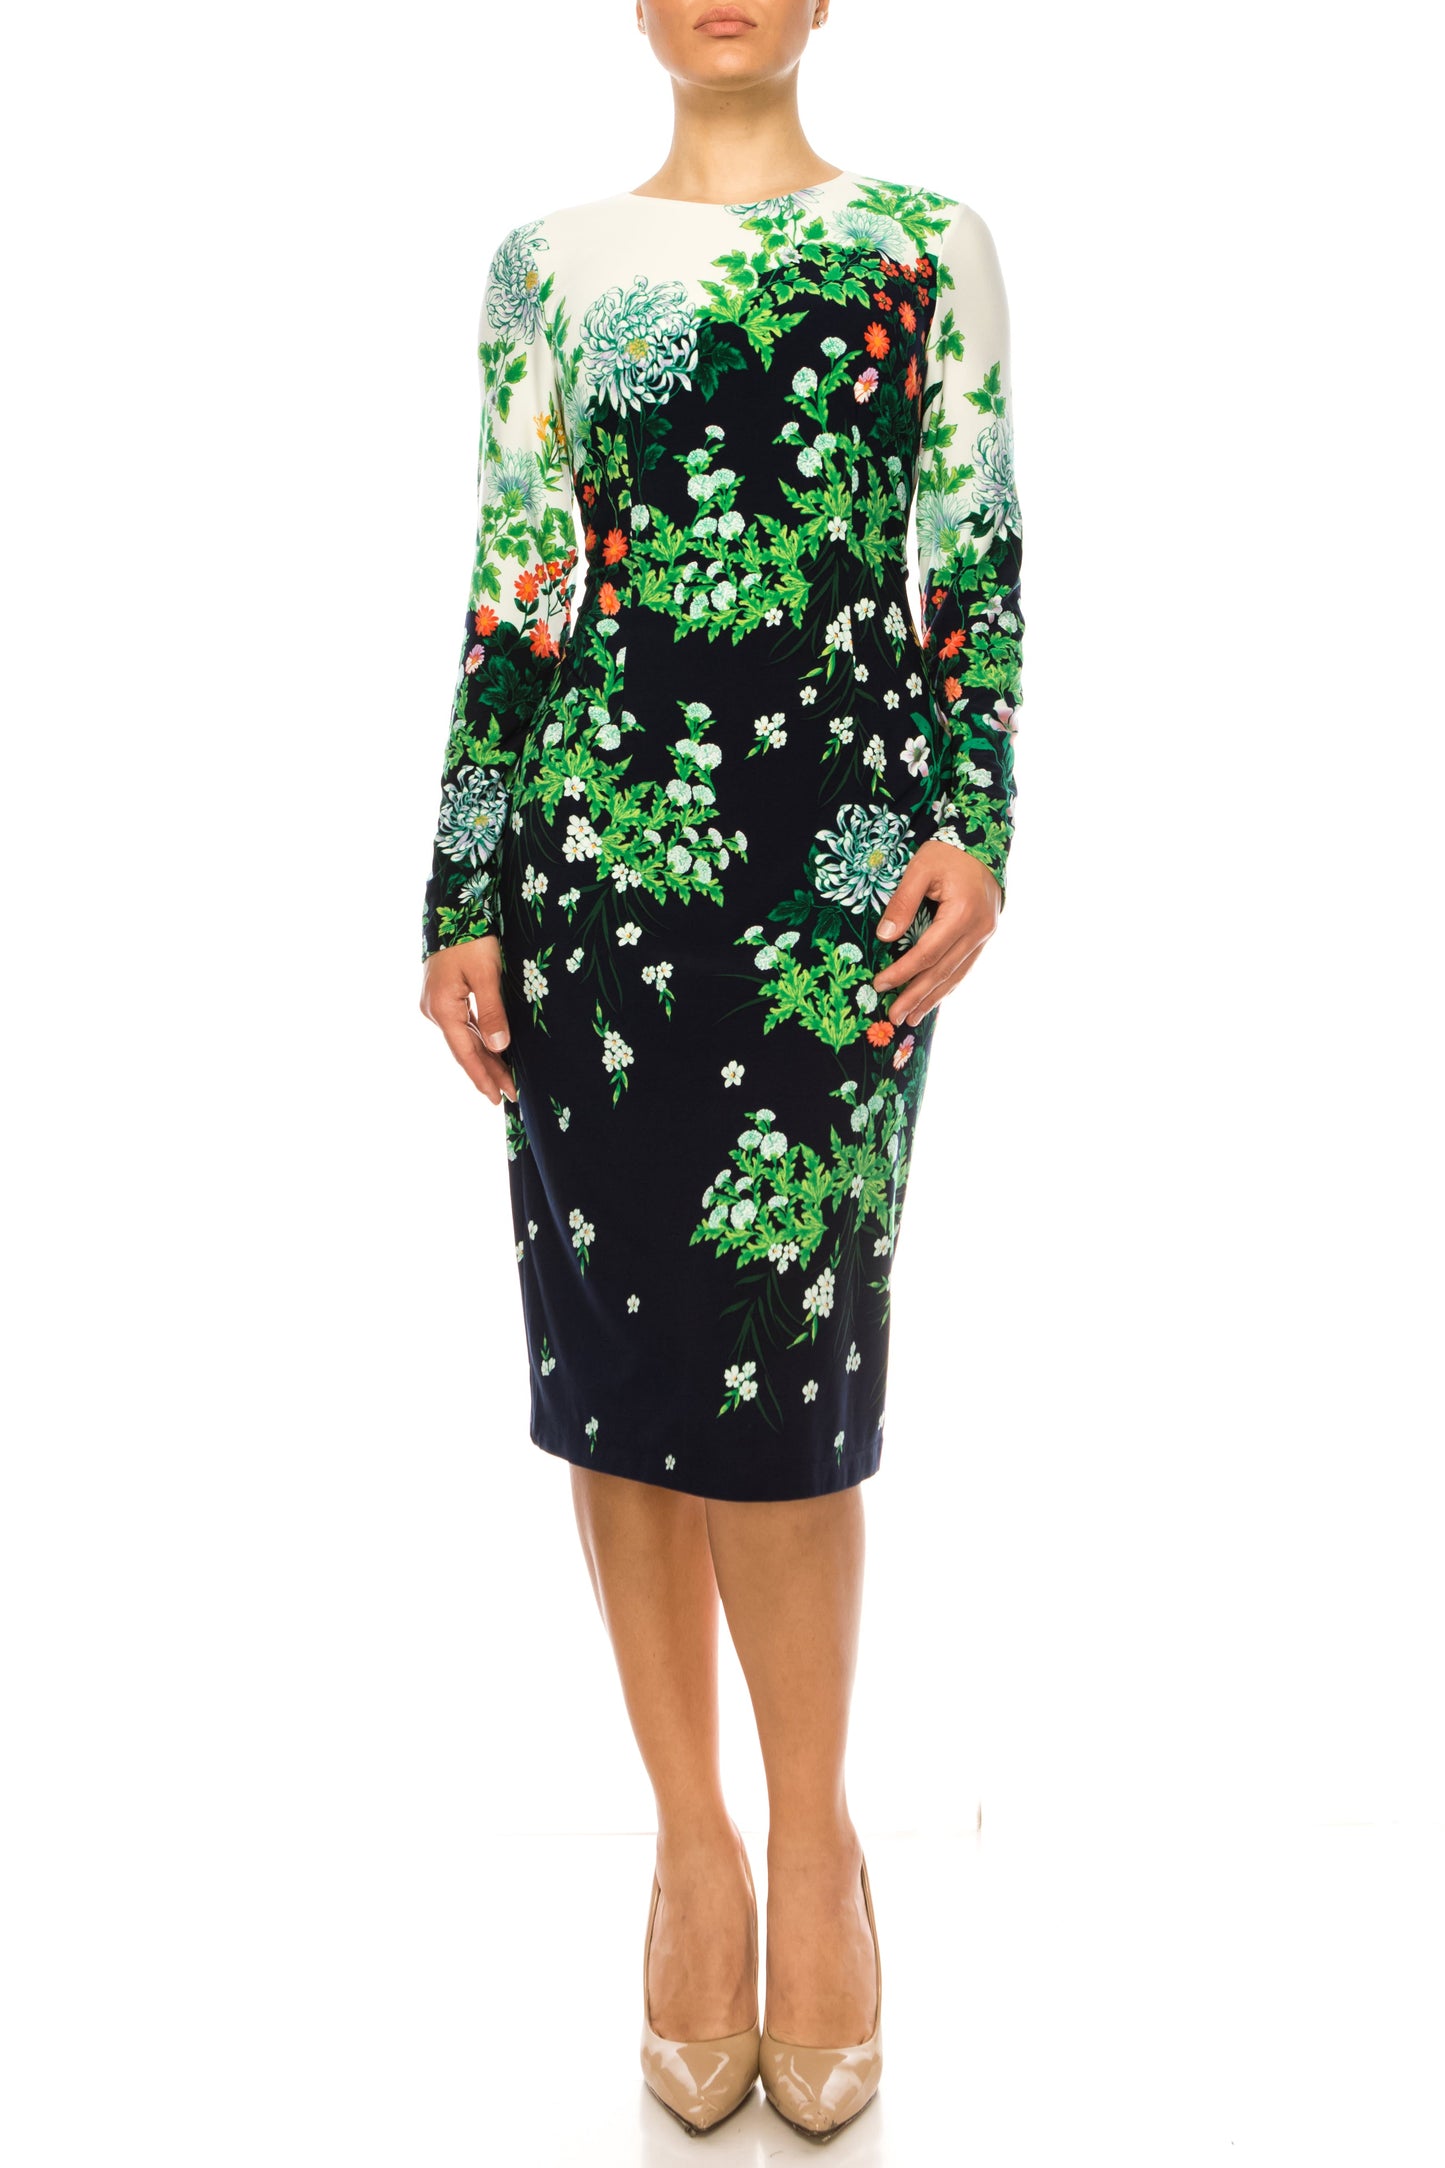 White and Green Sleeve Floral Sheath Dress